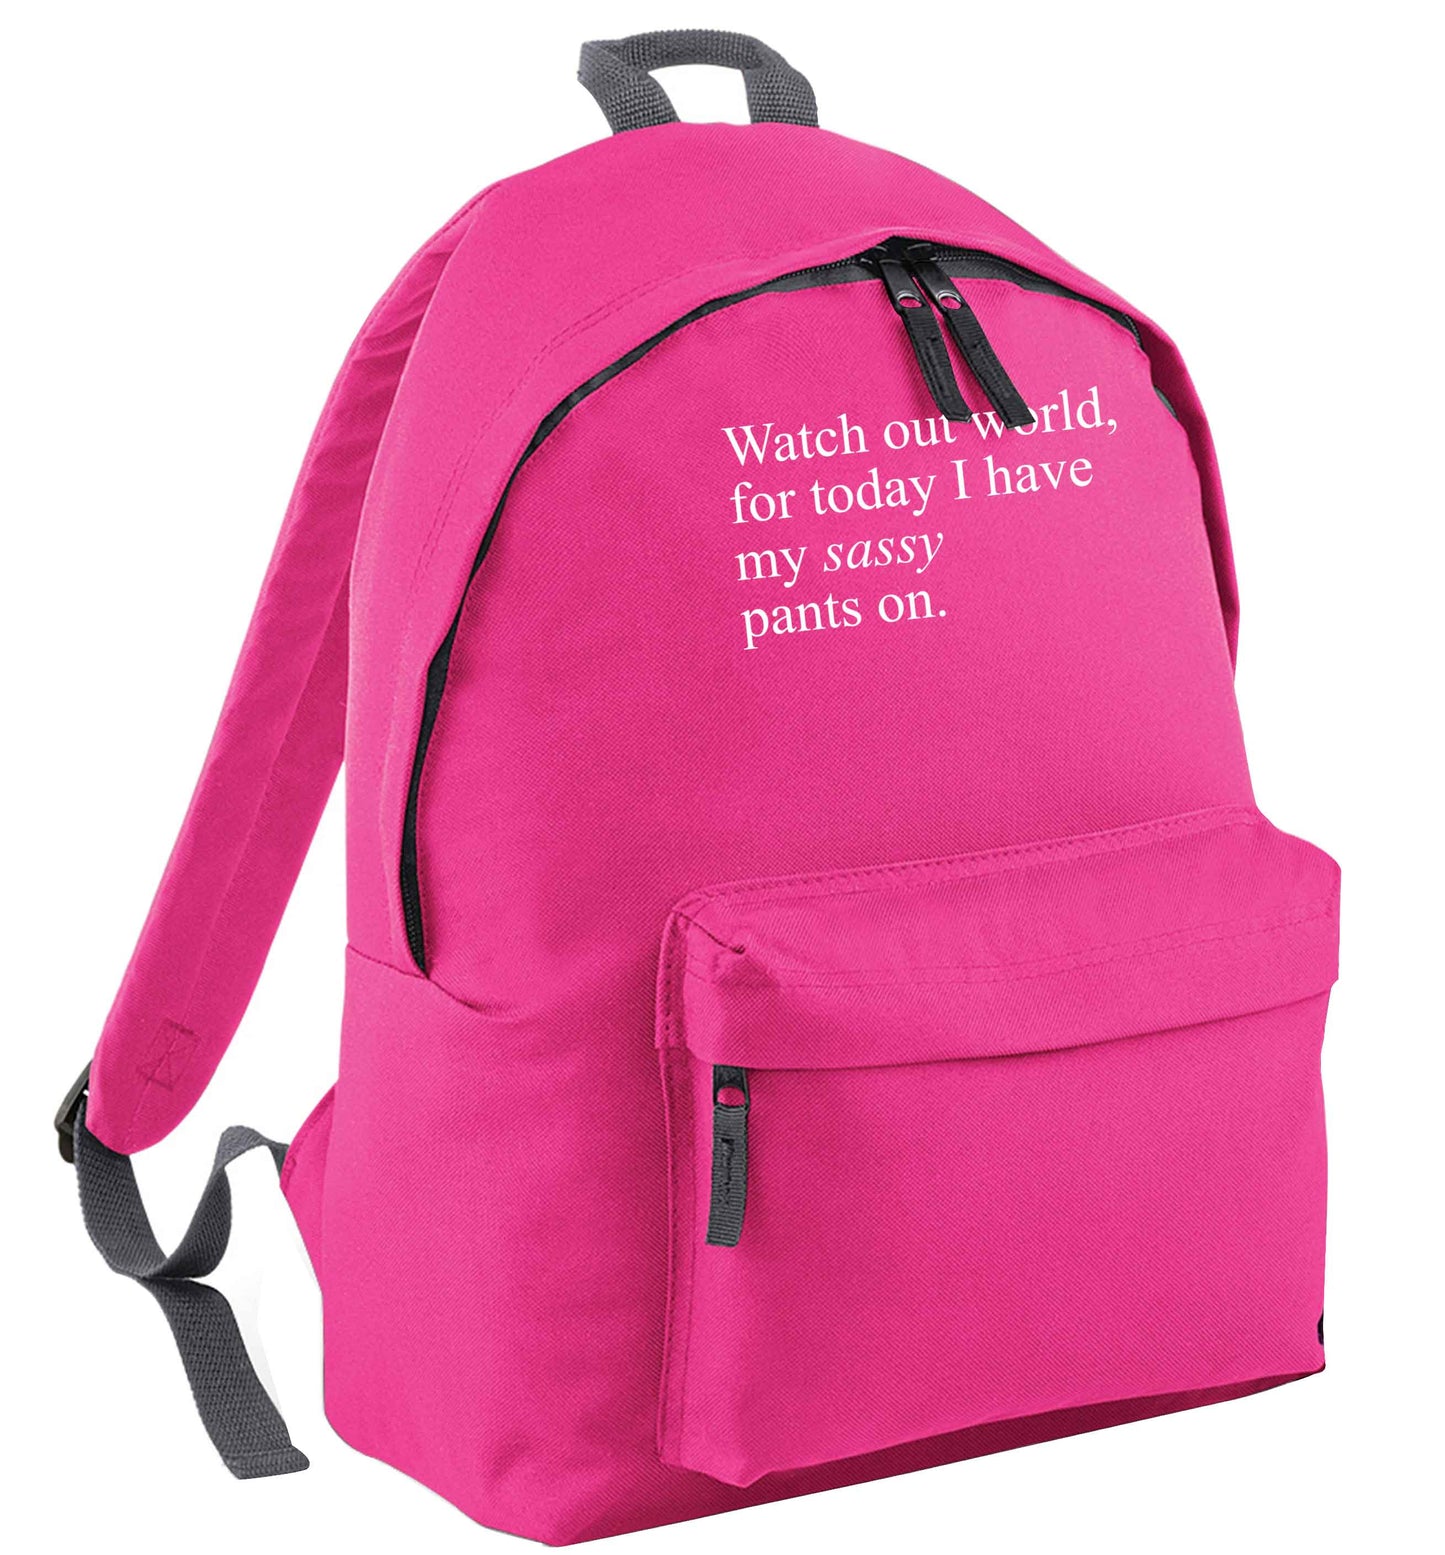 Watch out world for today I have my sassy pants on pink adults backpack